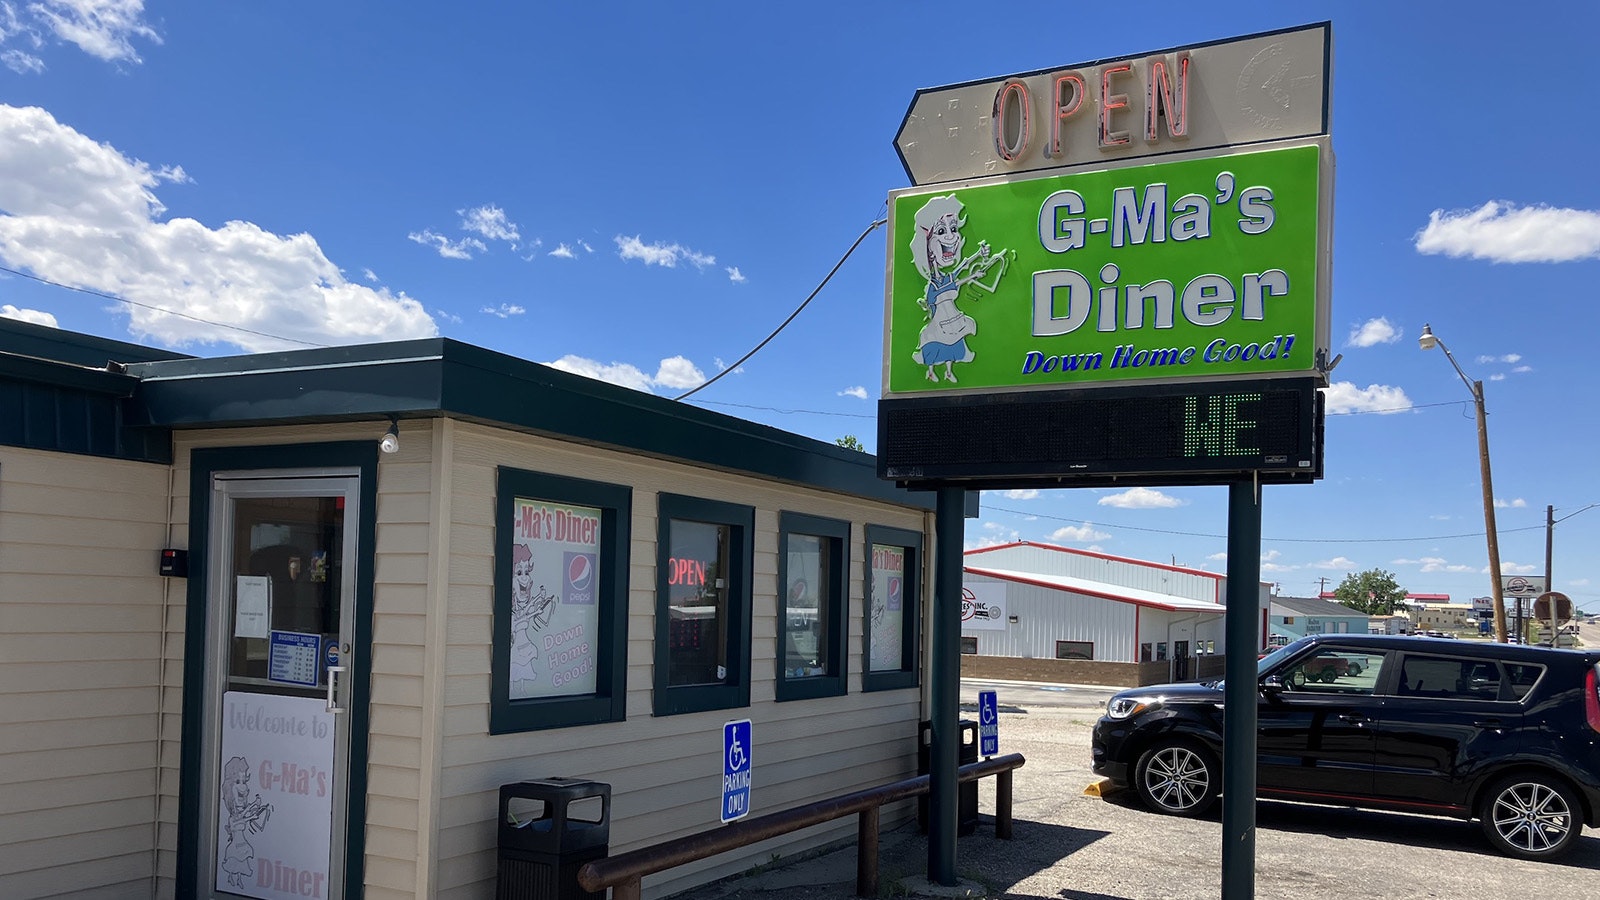 G-Ma’s Diner in Mills, Wyoming, typically draws a crowd for breakfast and lunch with a mix of regulars and visitors looking for homestyle diner fare.